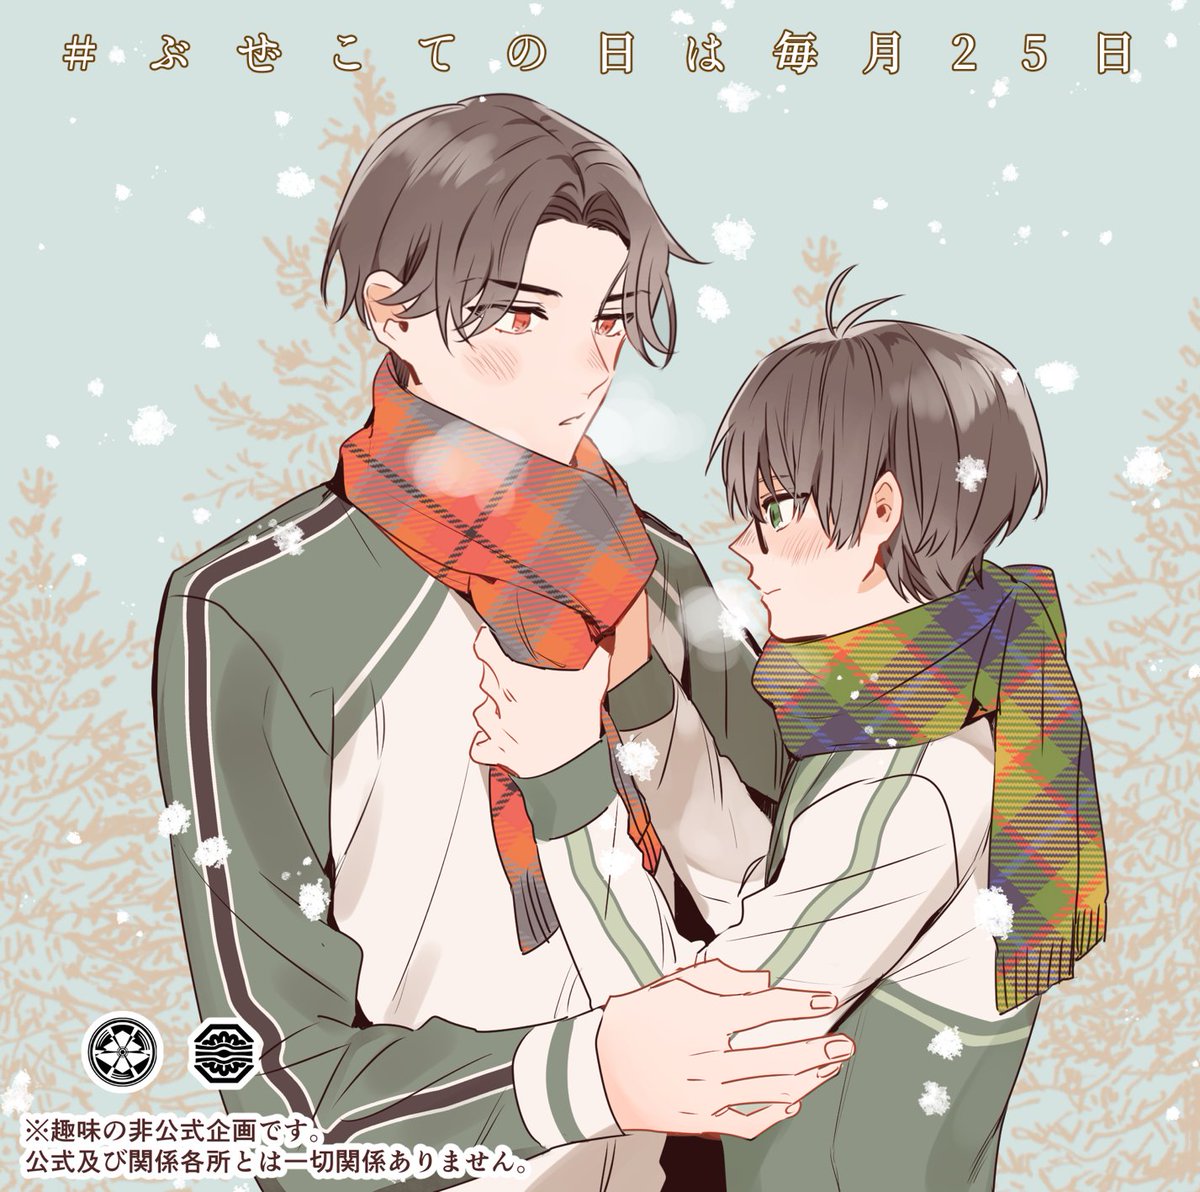 scarf multiple boys 2boys male focus brown hair red eyes jacket  illustration images